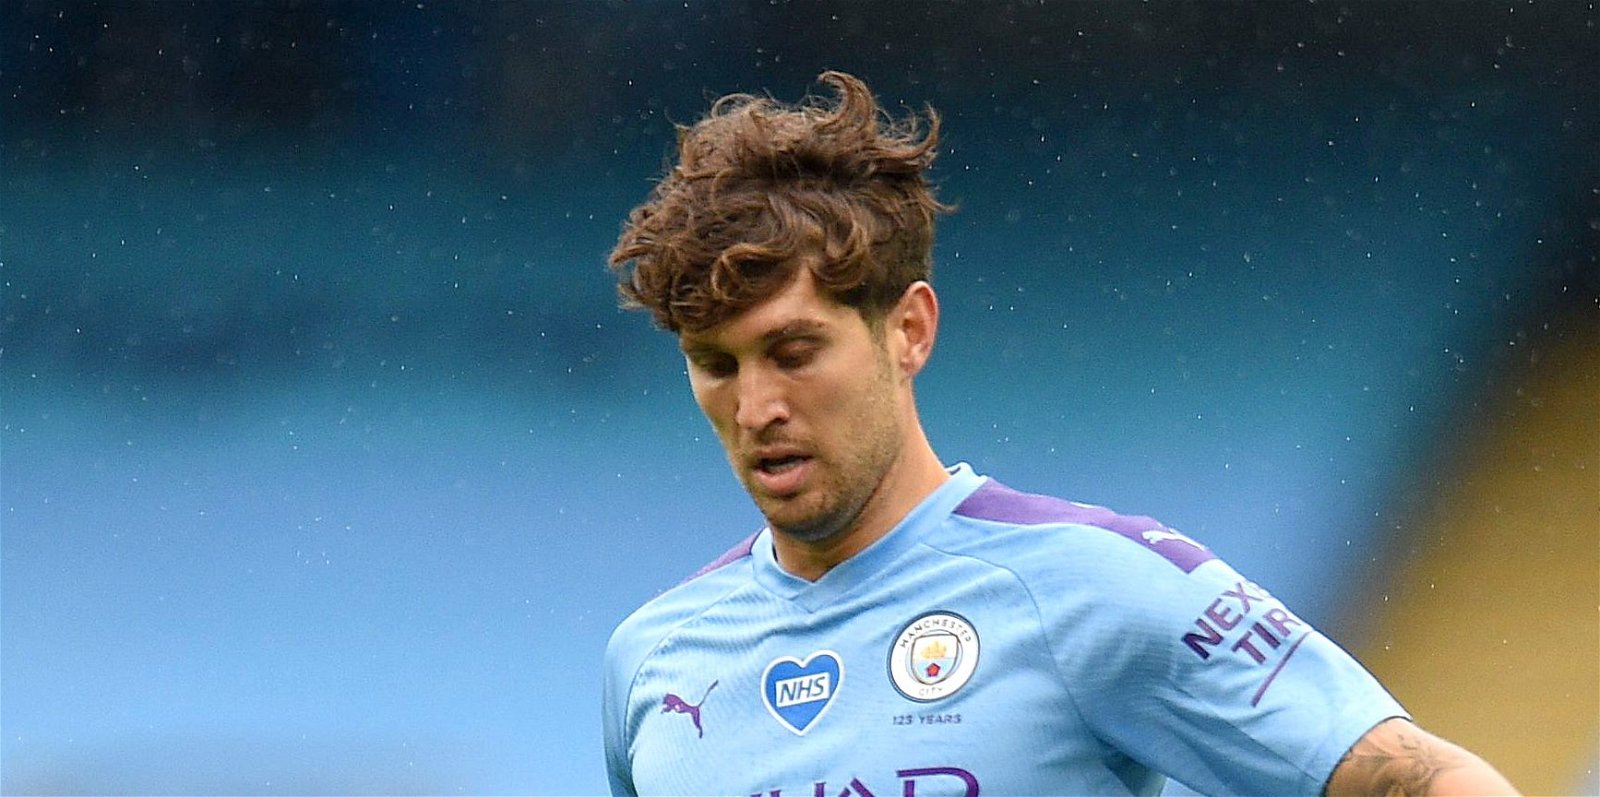 , &#8216;Leeds United should move for Manchester City defender&#8217; &#8211; Radio host suggests